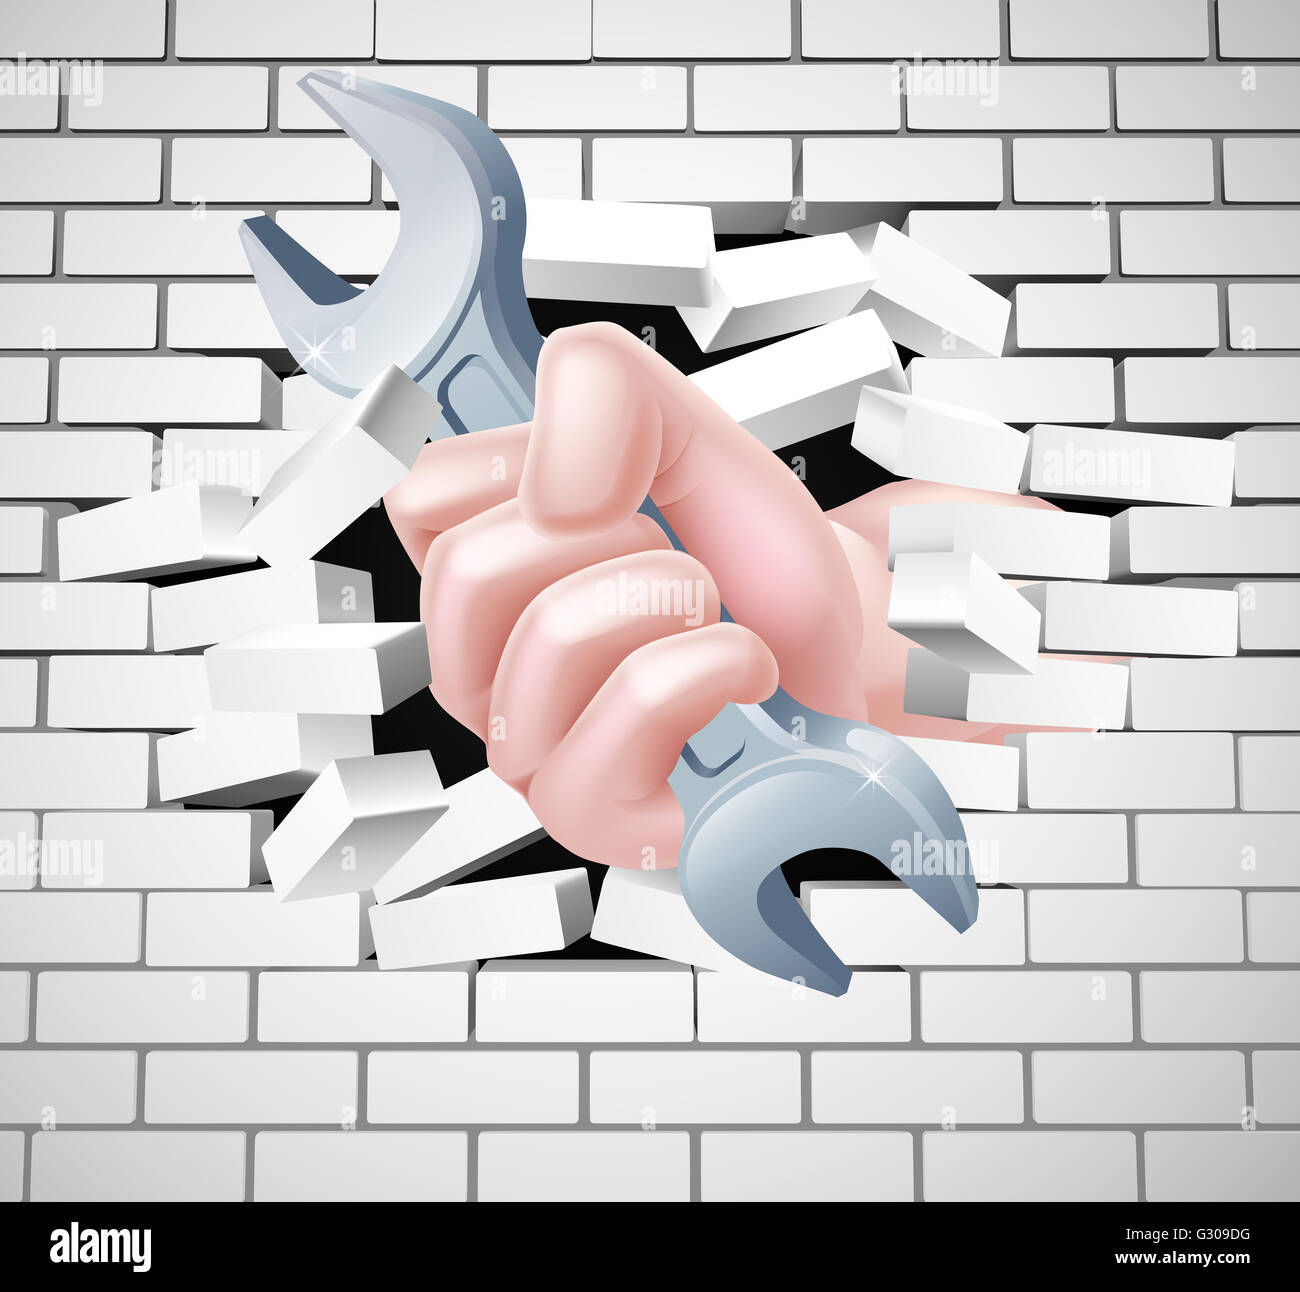 Conceptual illustration of a hand holding a spanner breaking through a white brick wall Stock Photo